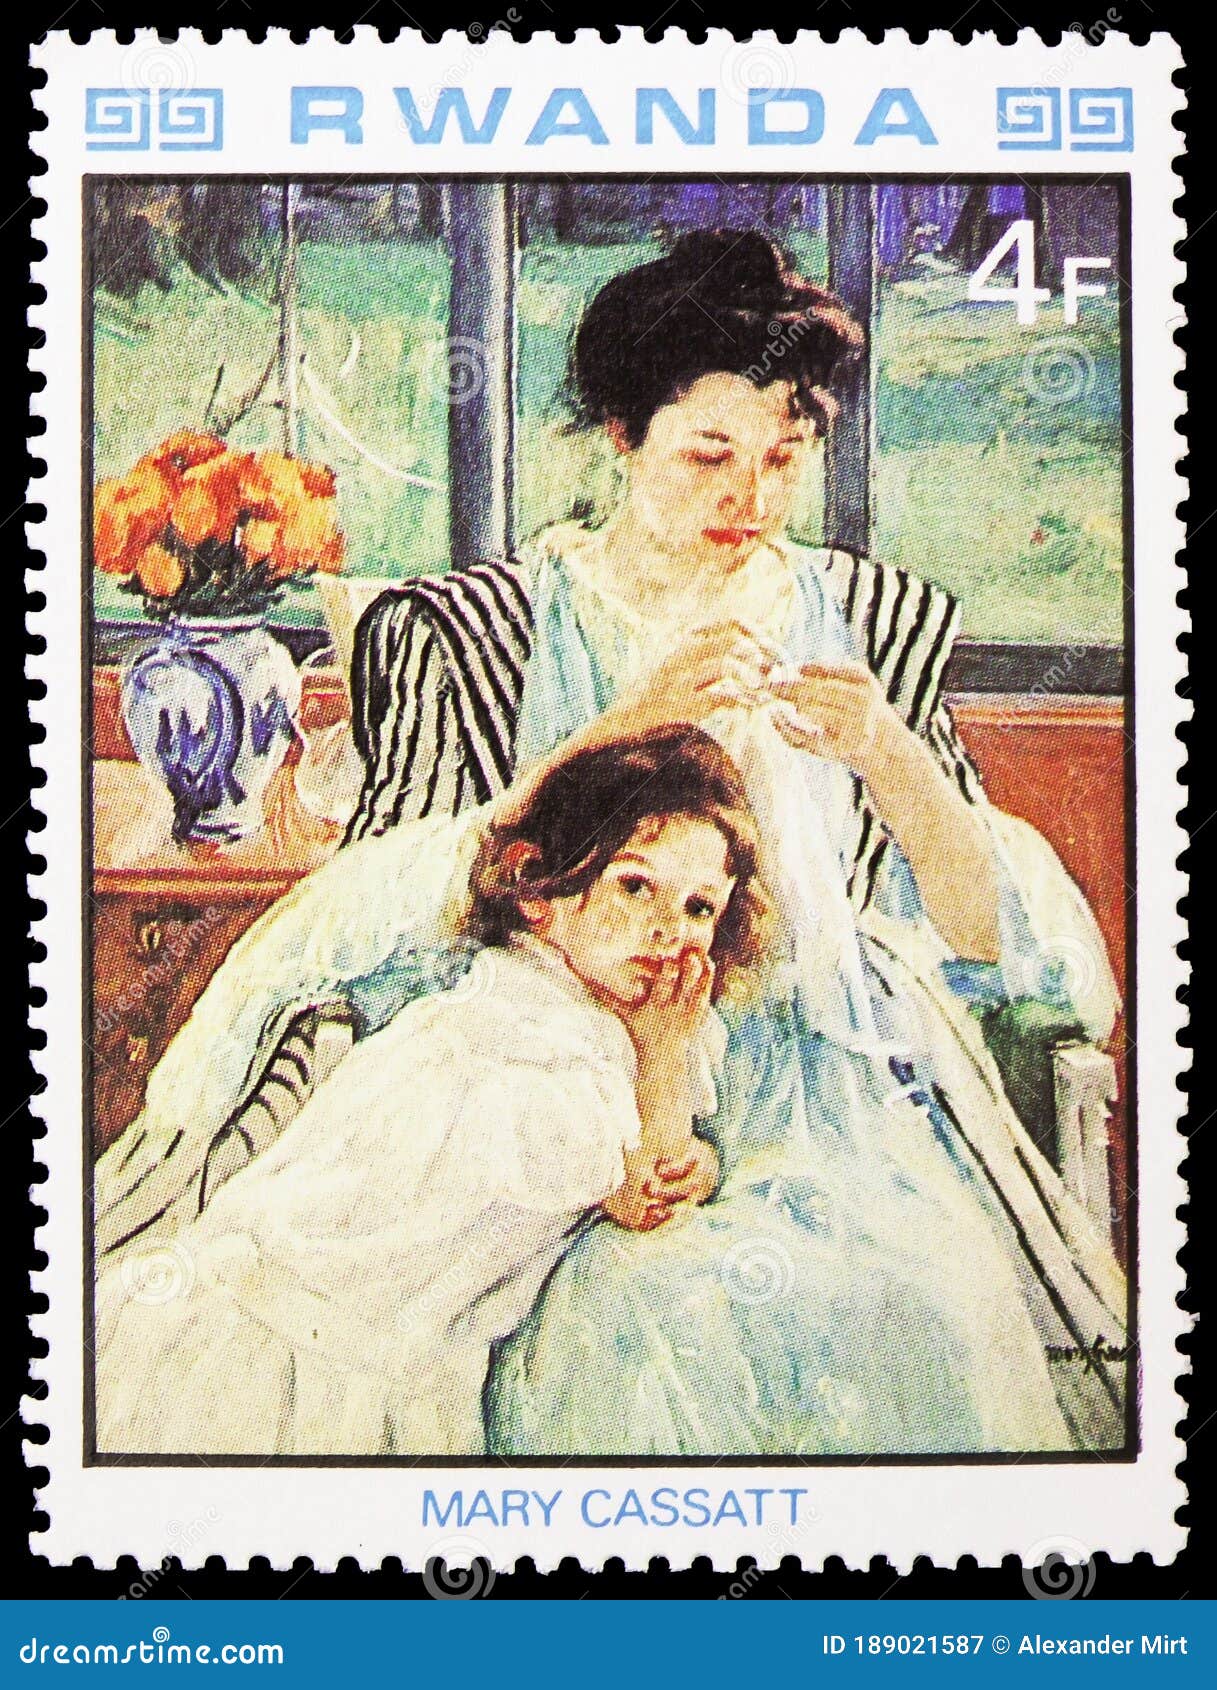 #1 source The best prices on Vintage postage stamp 20x MARY CASSATT Boating Party Artist 1966 5c Unused Vintage Postage Stamp Free Shipping